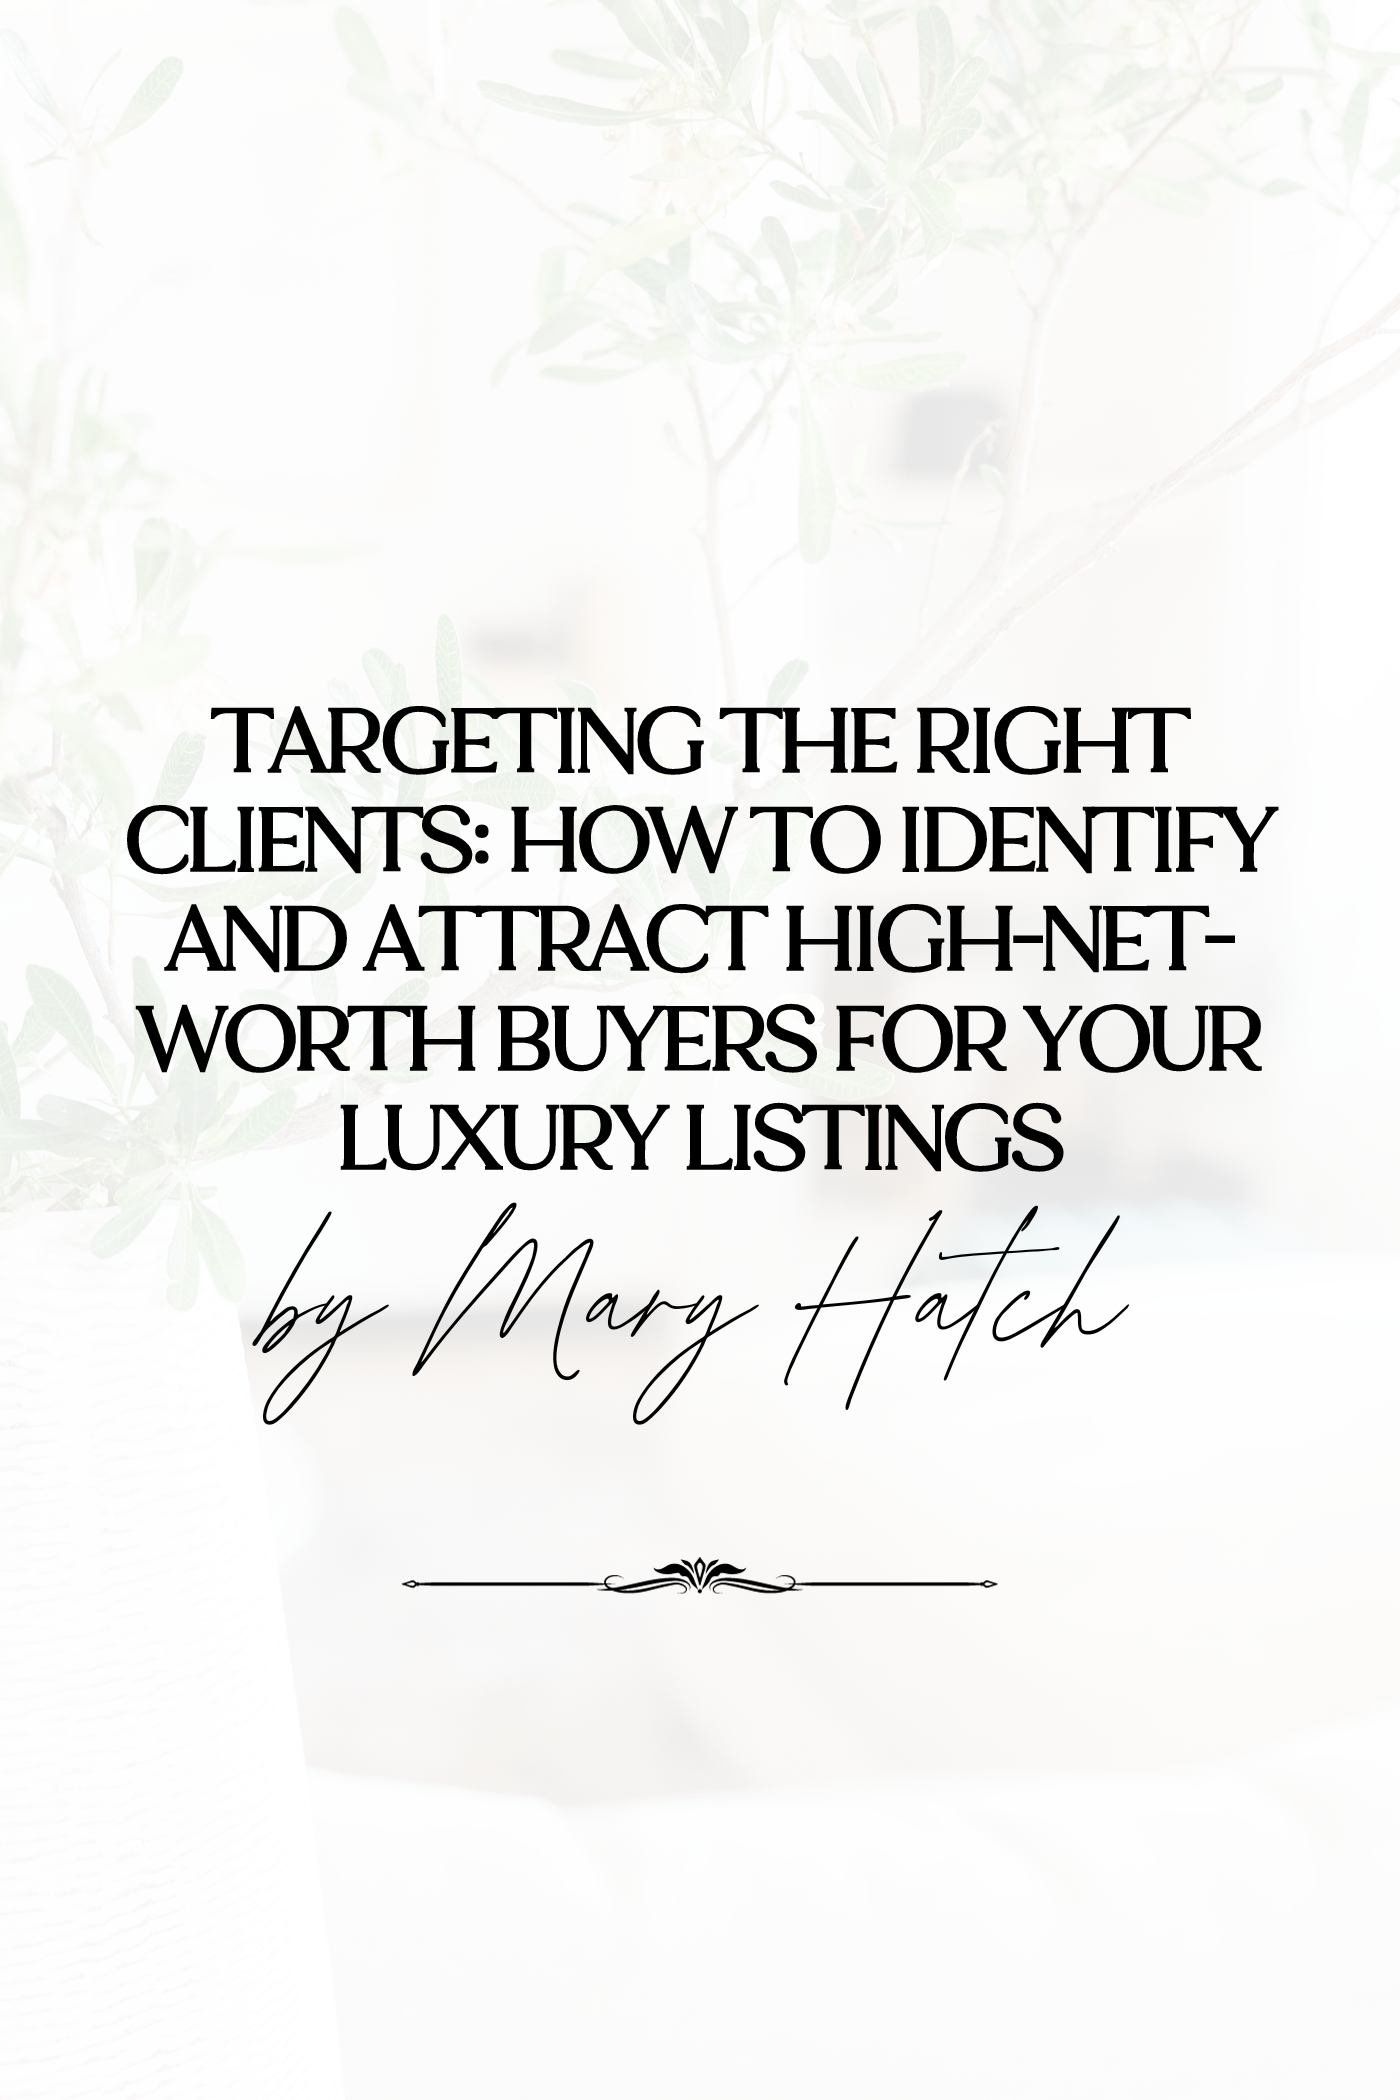 Targeting the Right Clients: How to Identify and Attract High-Net-Worth Buyers for Your Luxury Listings